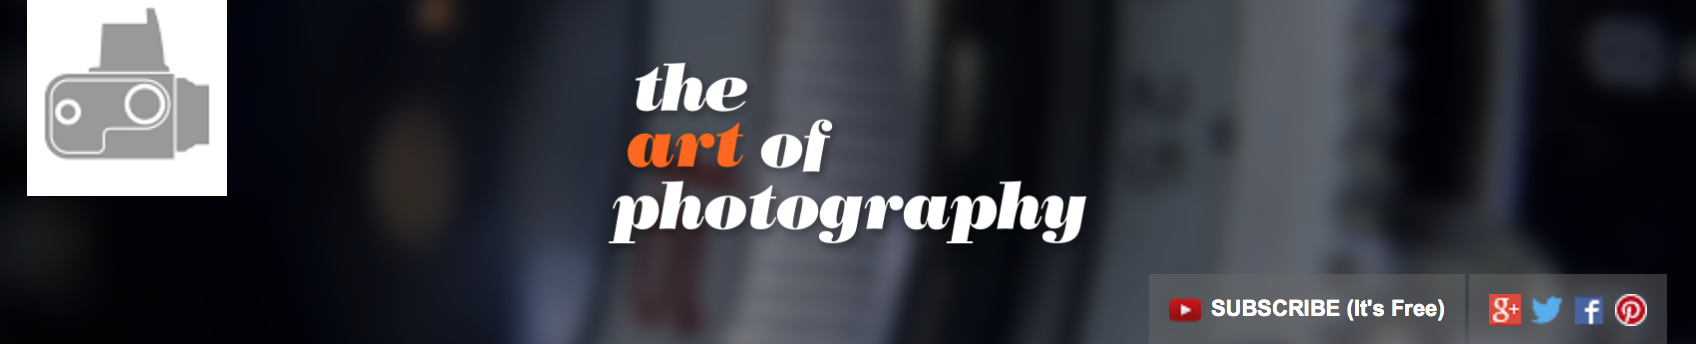 List of Most Popular Photography YouTube Channels art of photography